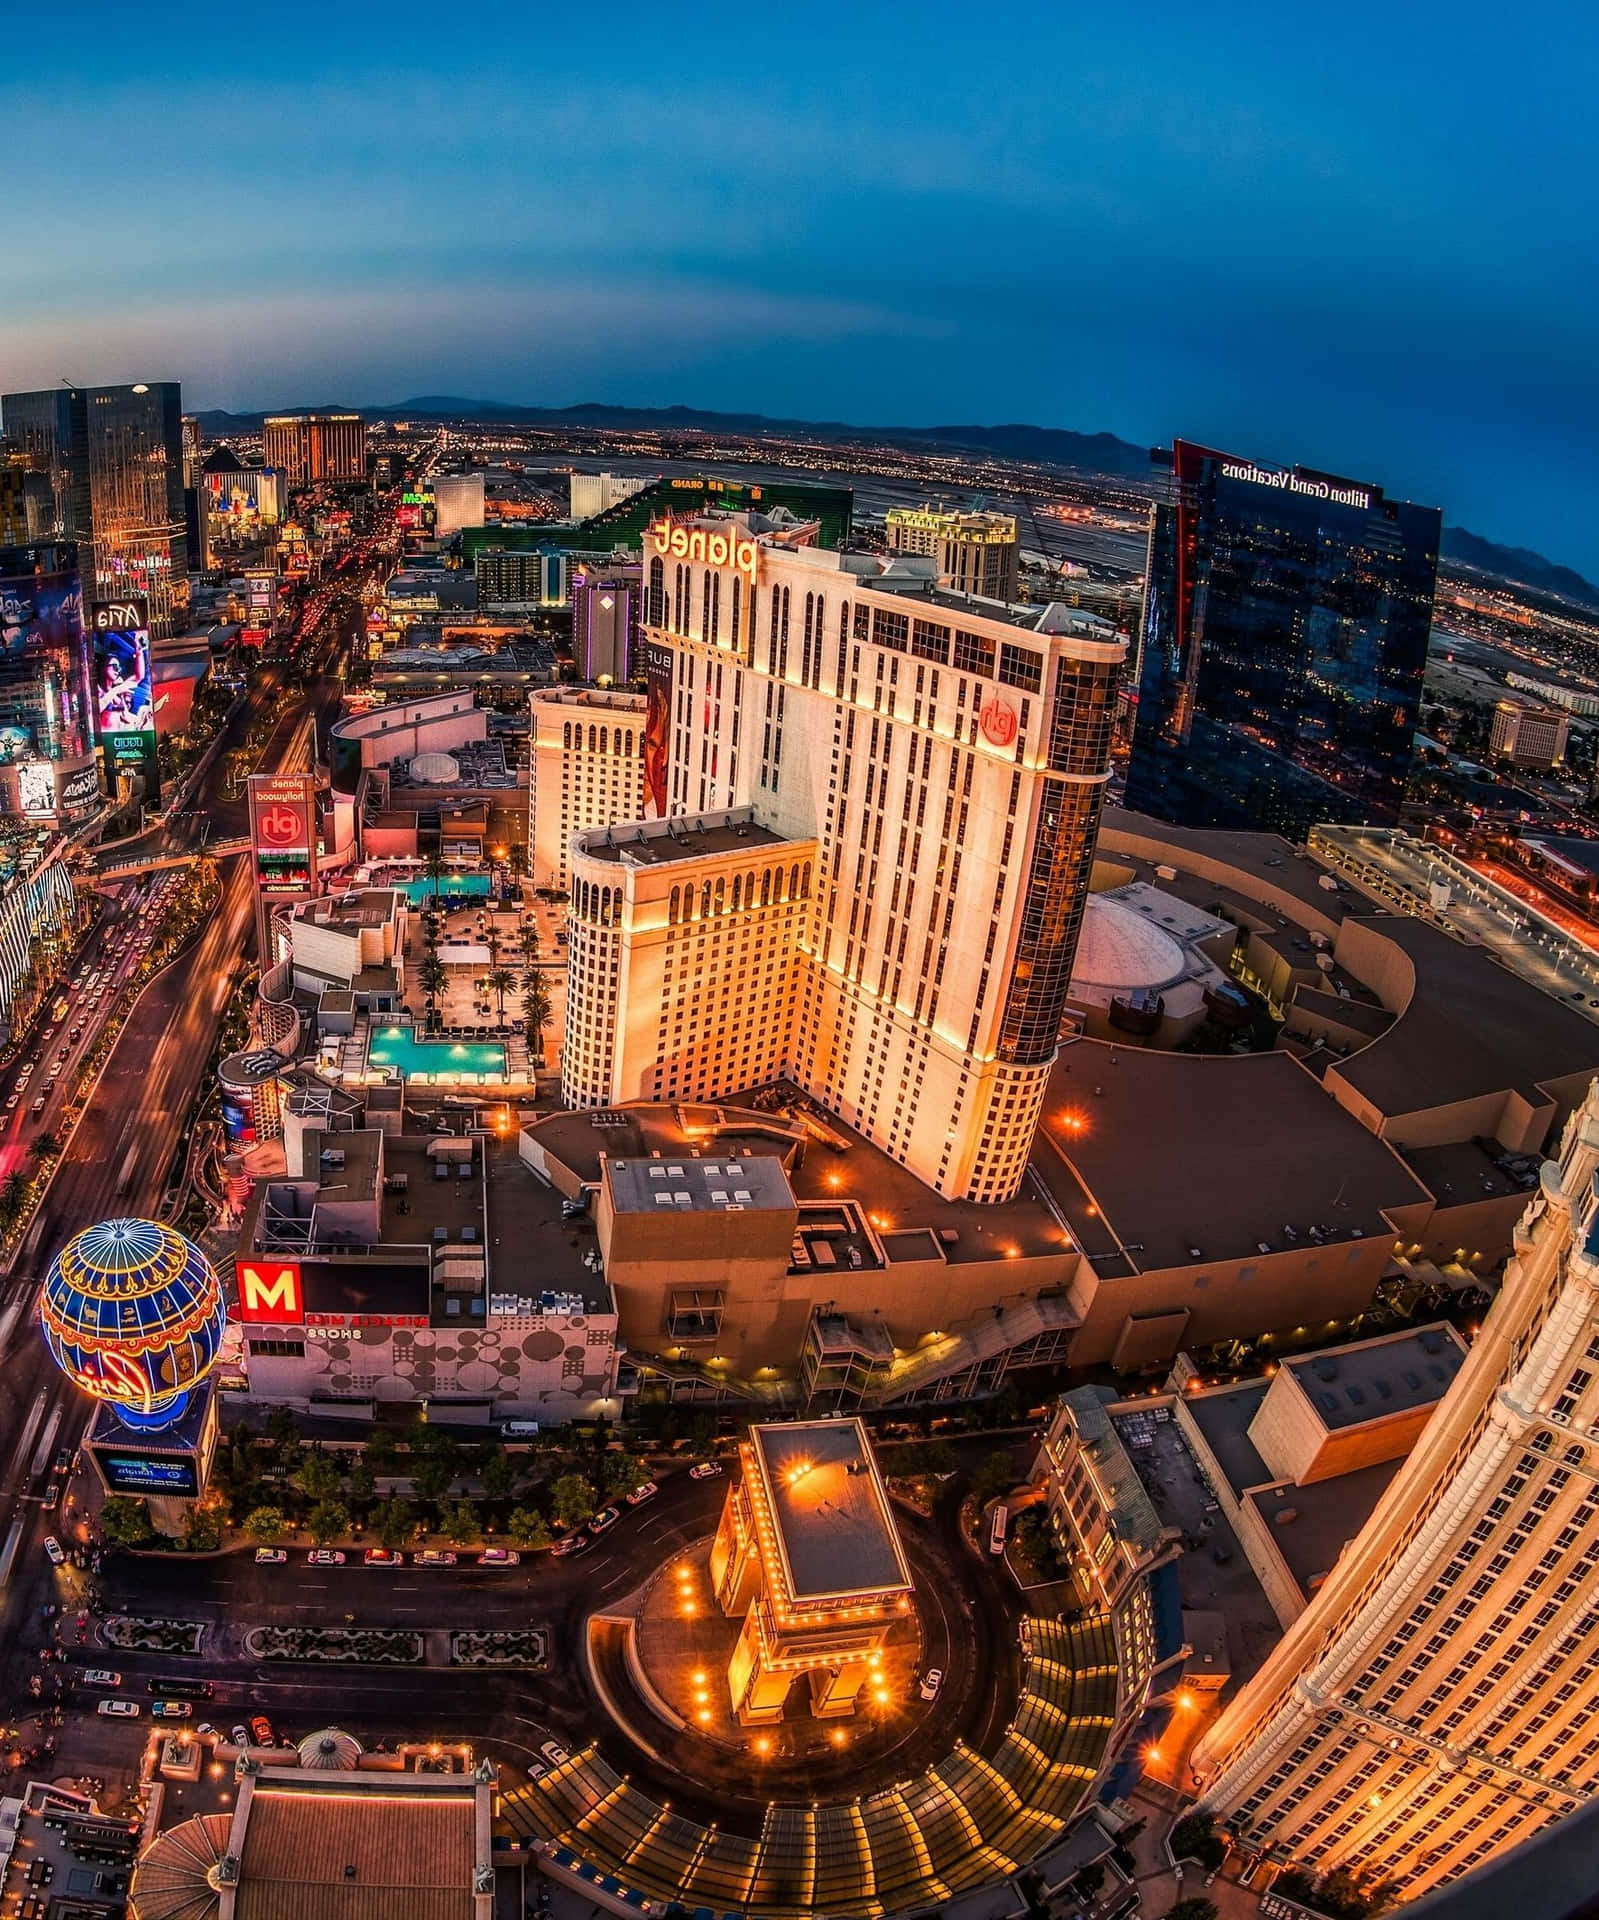 A view of the strip from above - Las Vegas